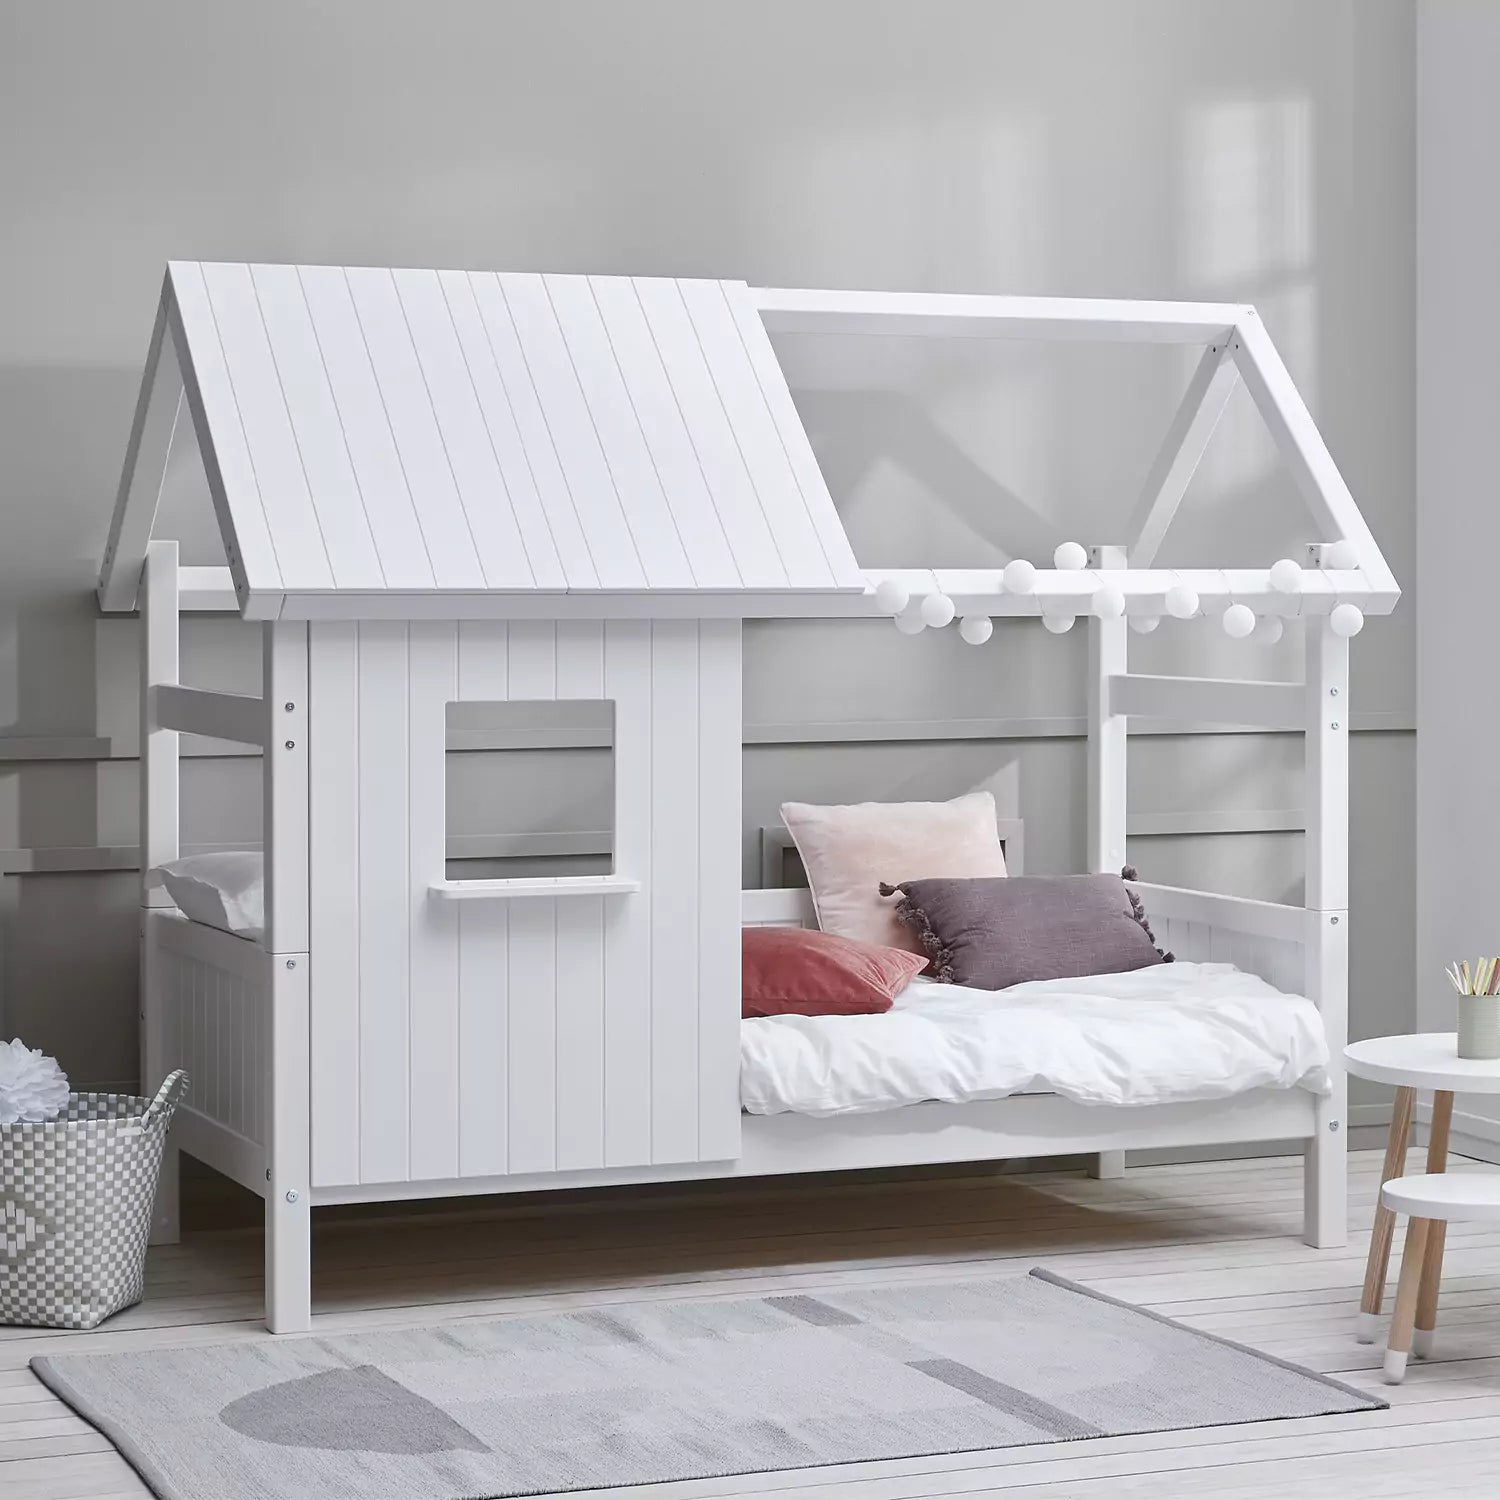 An image of Buy Thuka Nordic Playhouse Kids Day Bed 3 - White